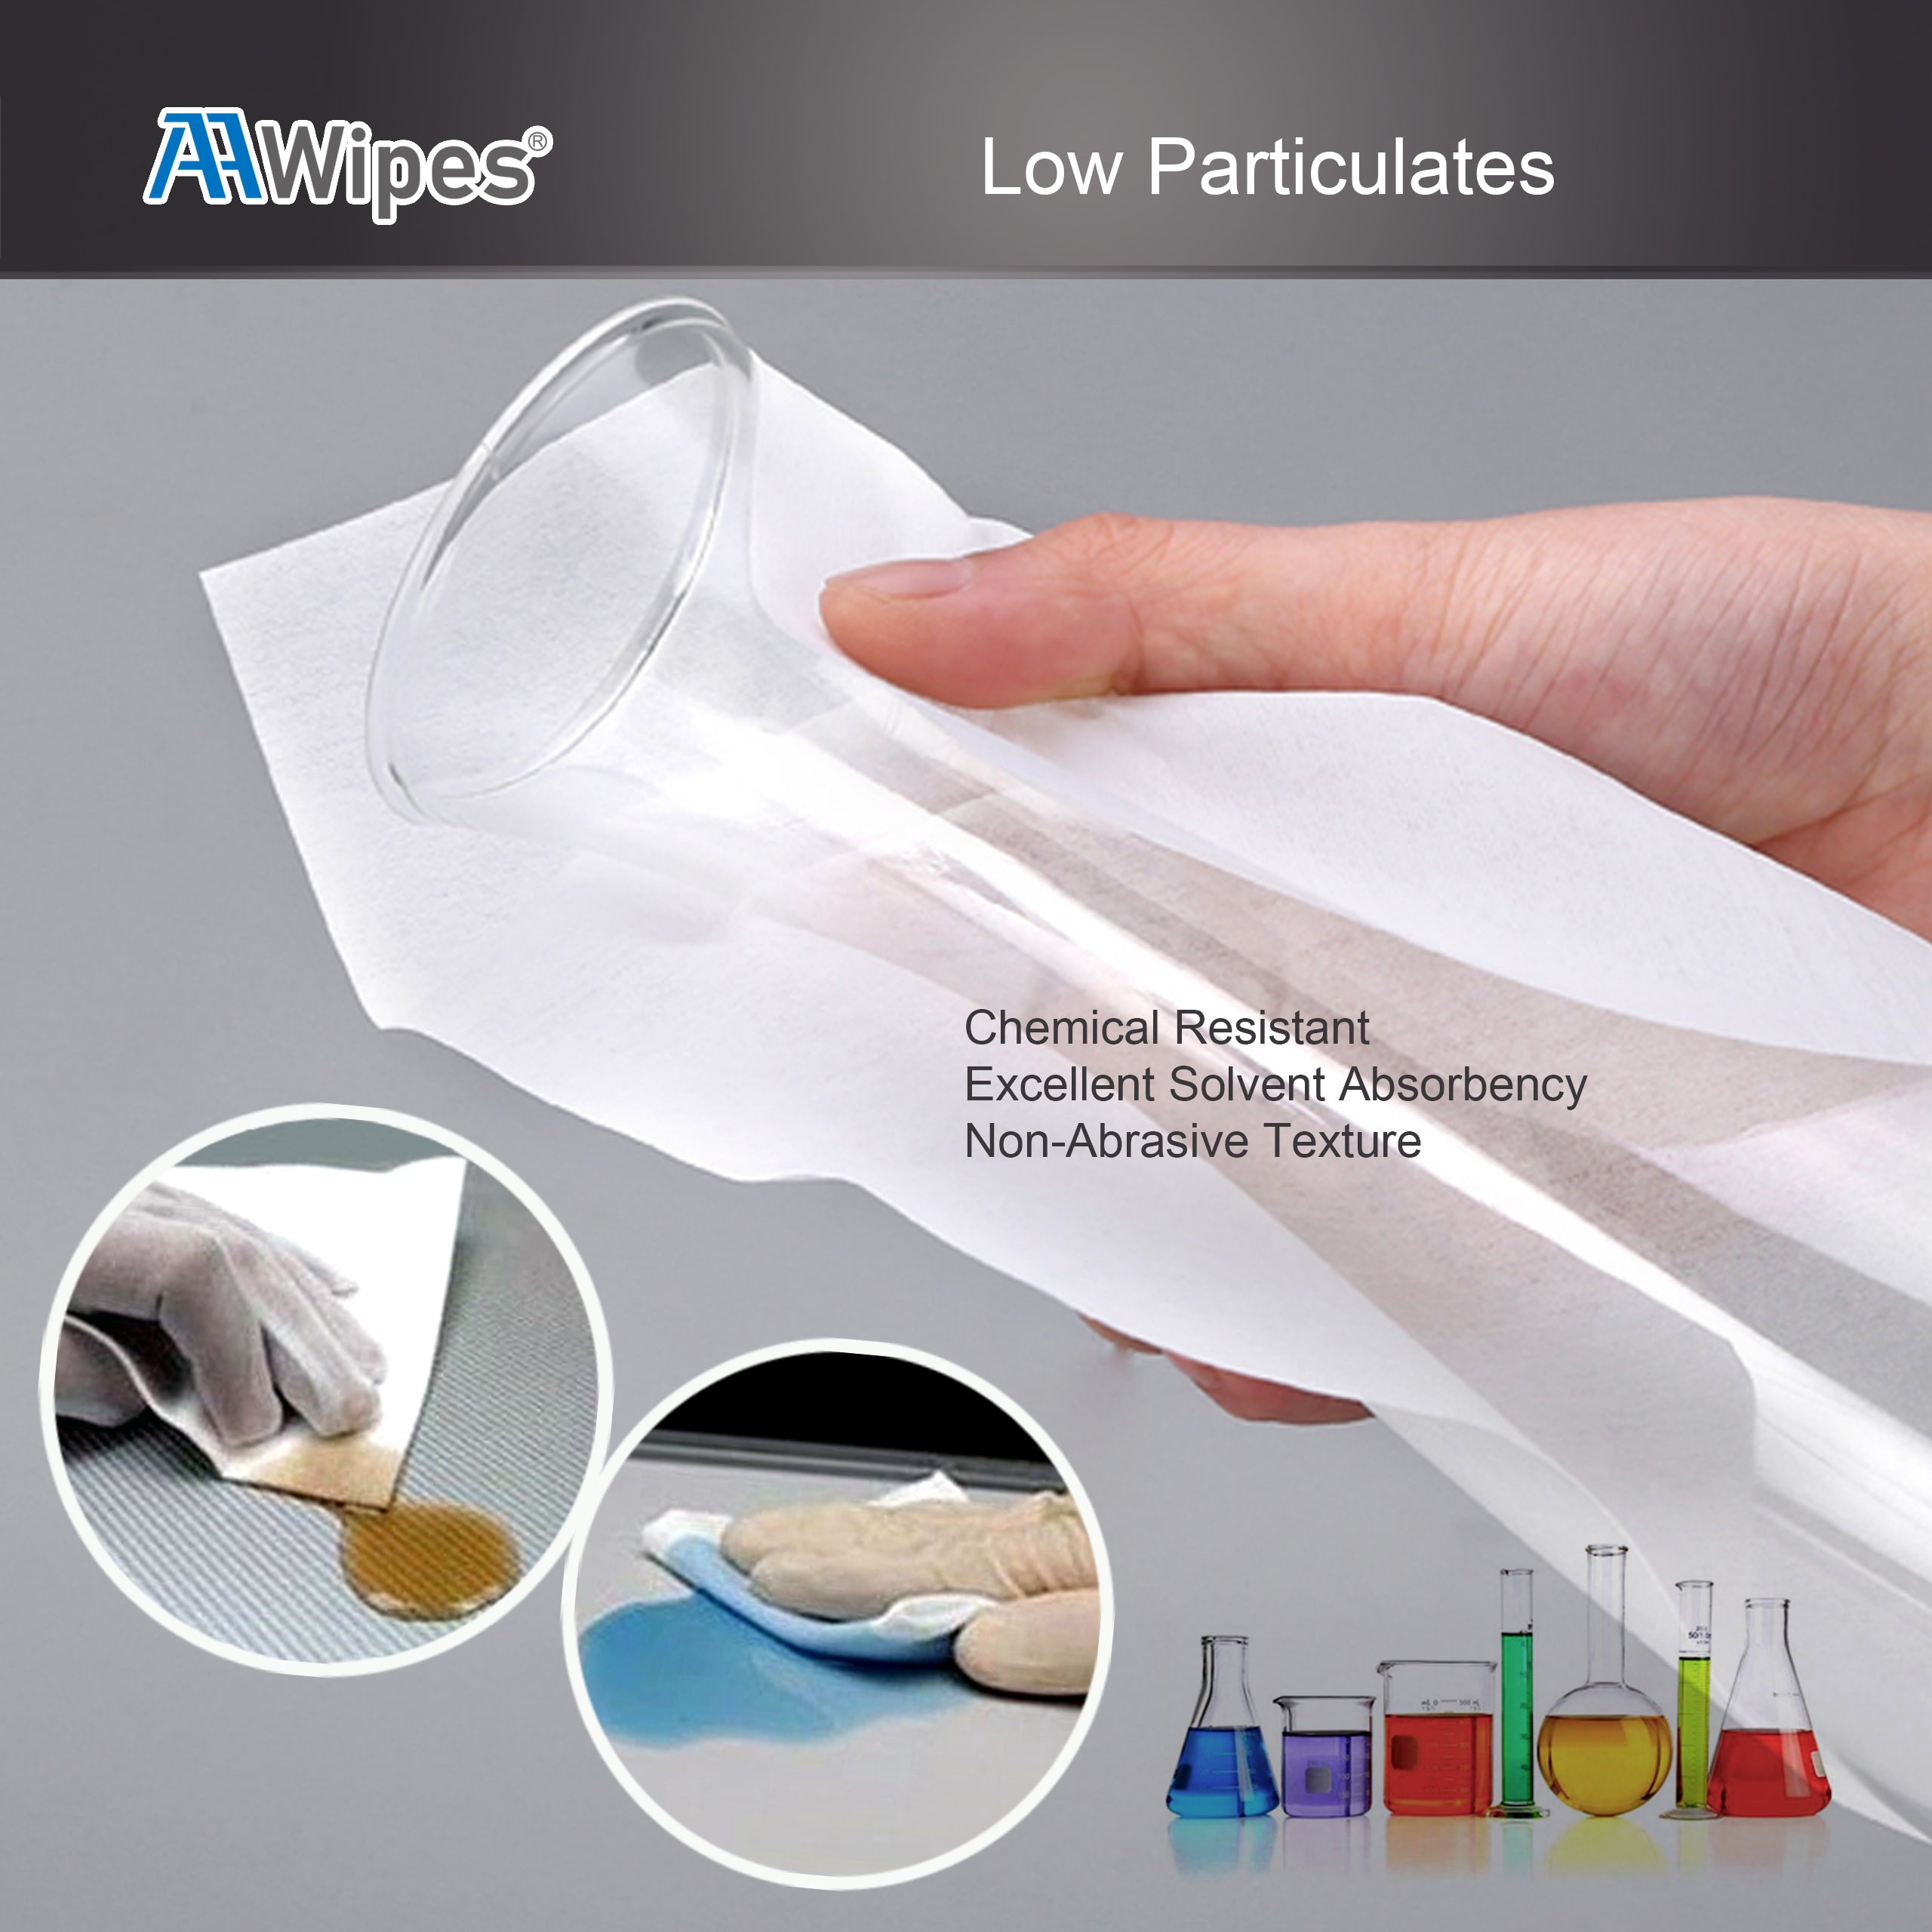 Nonwoven Wipes, Cellulose/Polyester Blend, 4" x 4" (Starting at 1 Box 16,800 Wipes per 28 Bags) (No. NW06804)